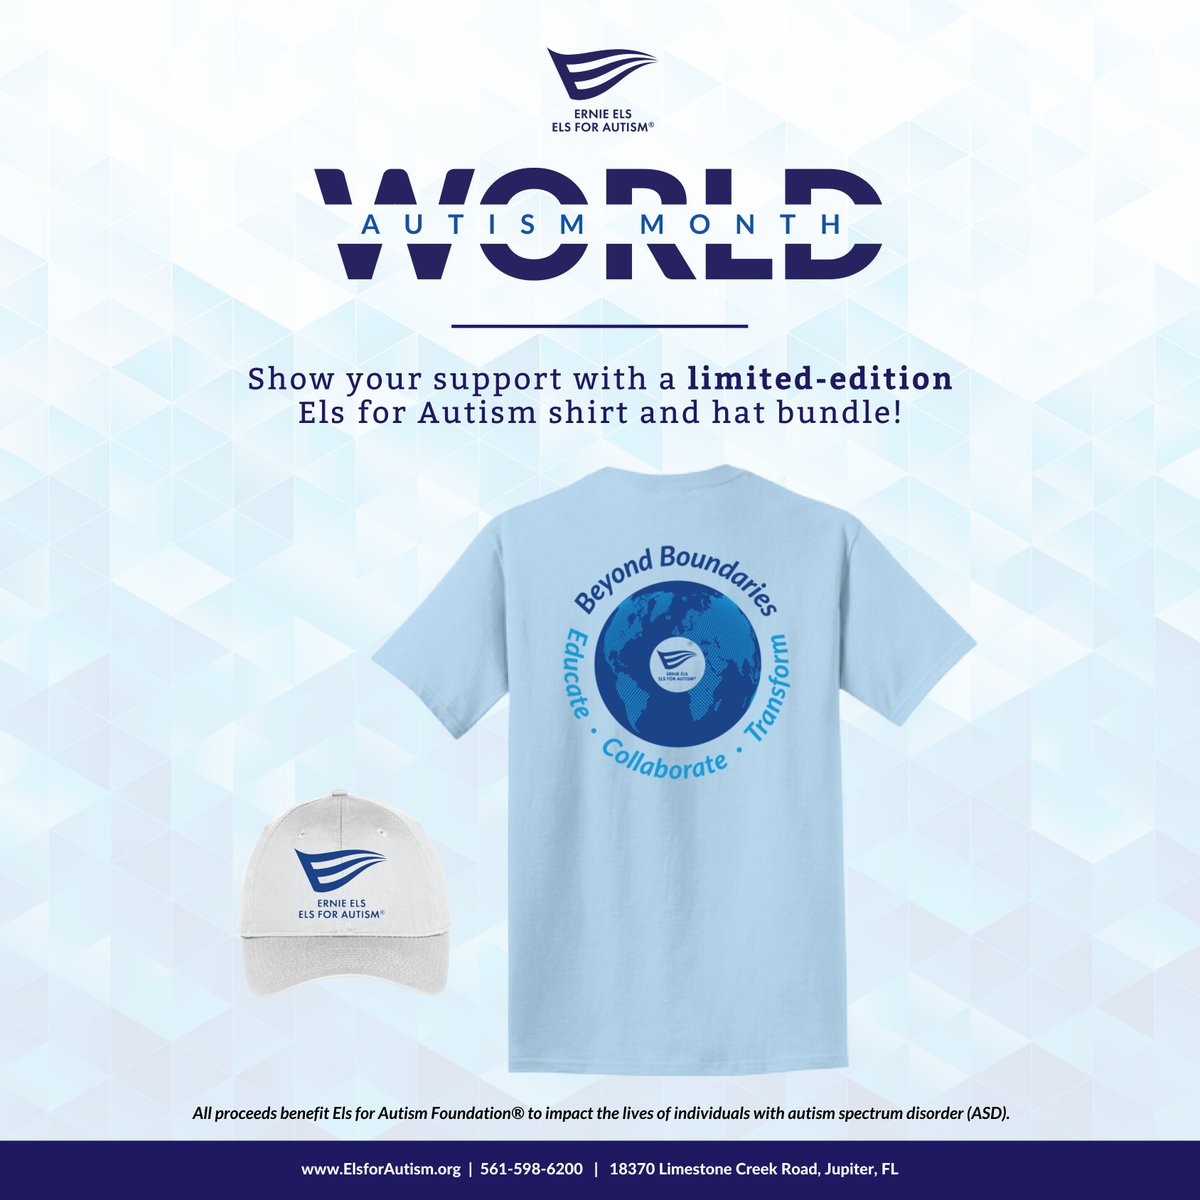 We are thrilled to offer a limited-edition World Autism Month shirt and hat. Take advantage of our bundle offer by purchasing both for $36 to represent the 1 in 36 children who identify with autism spectrum disorder (ASD)*. Purchase now: wam-store.itemorder.com/shop/home/